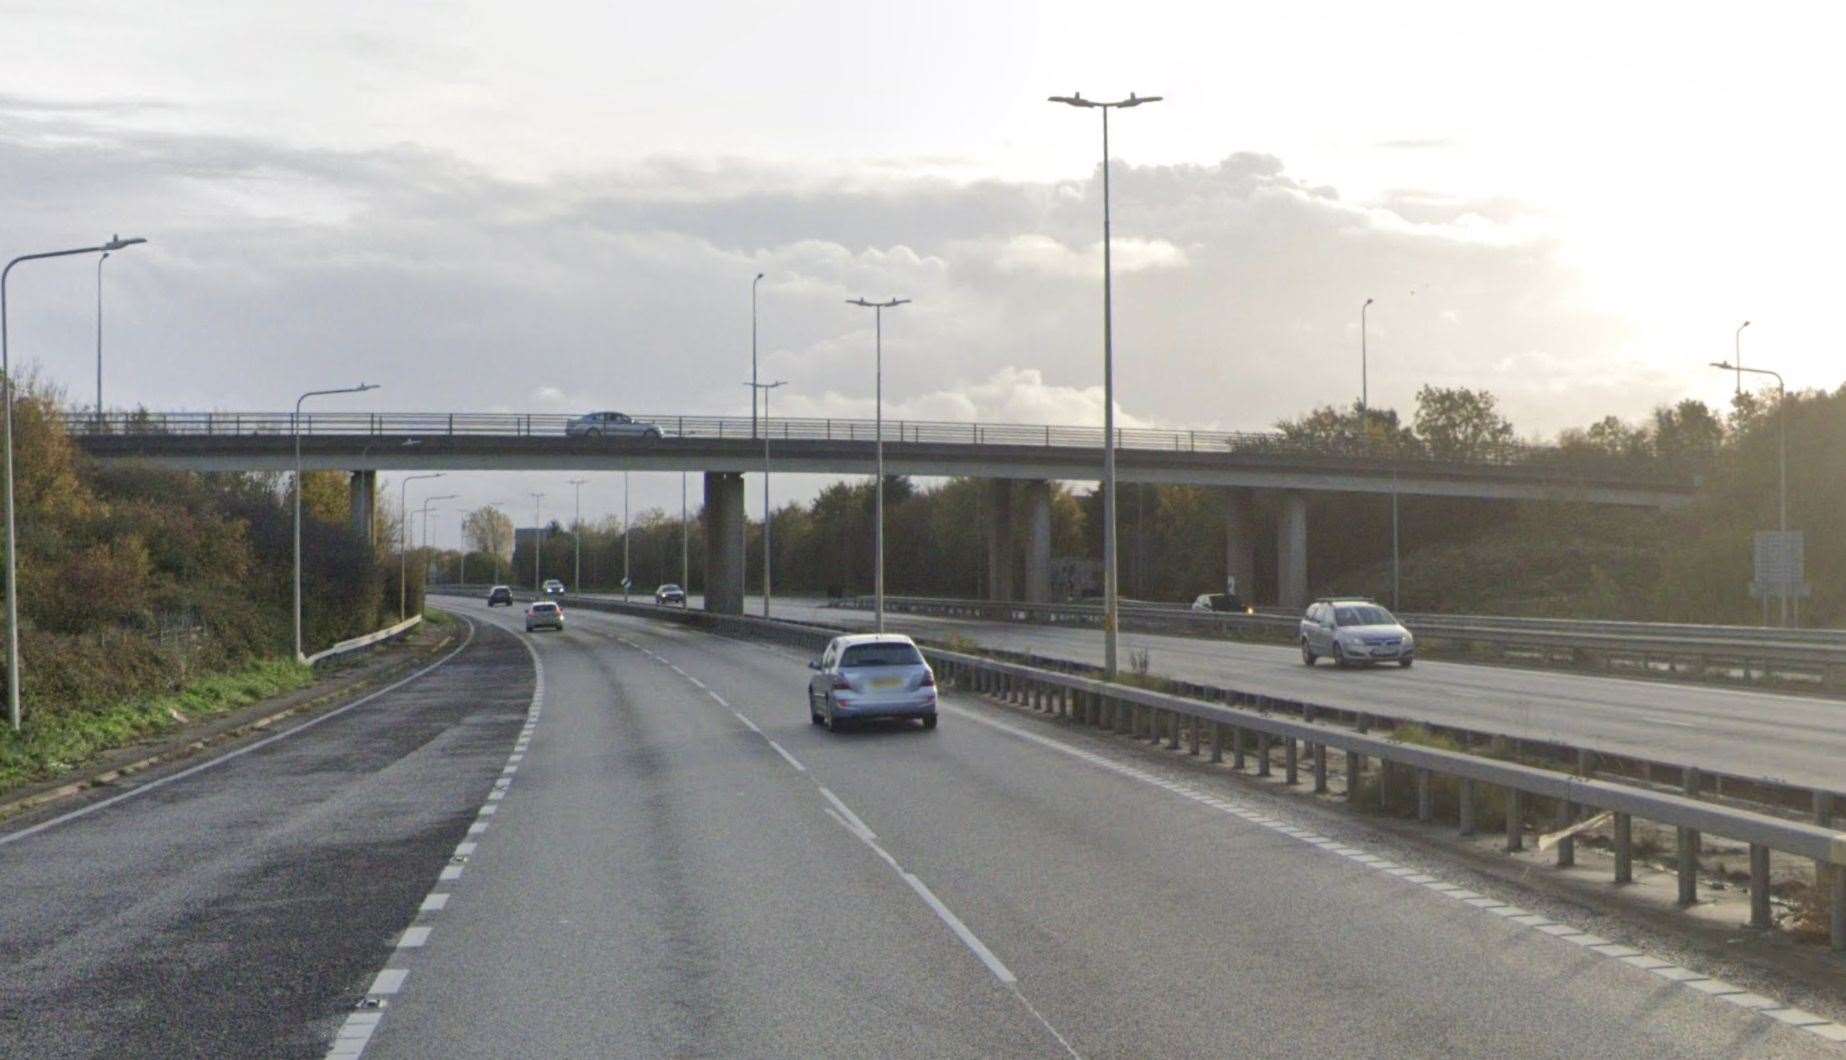 The Margate Road Interchange as seen from the A299 coastbound carriageway